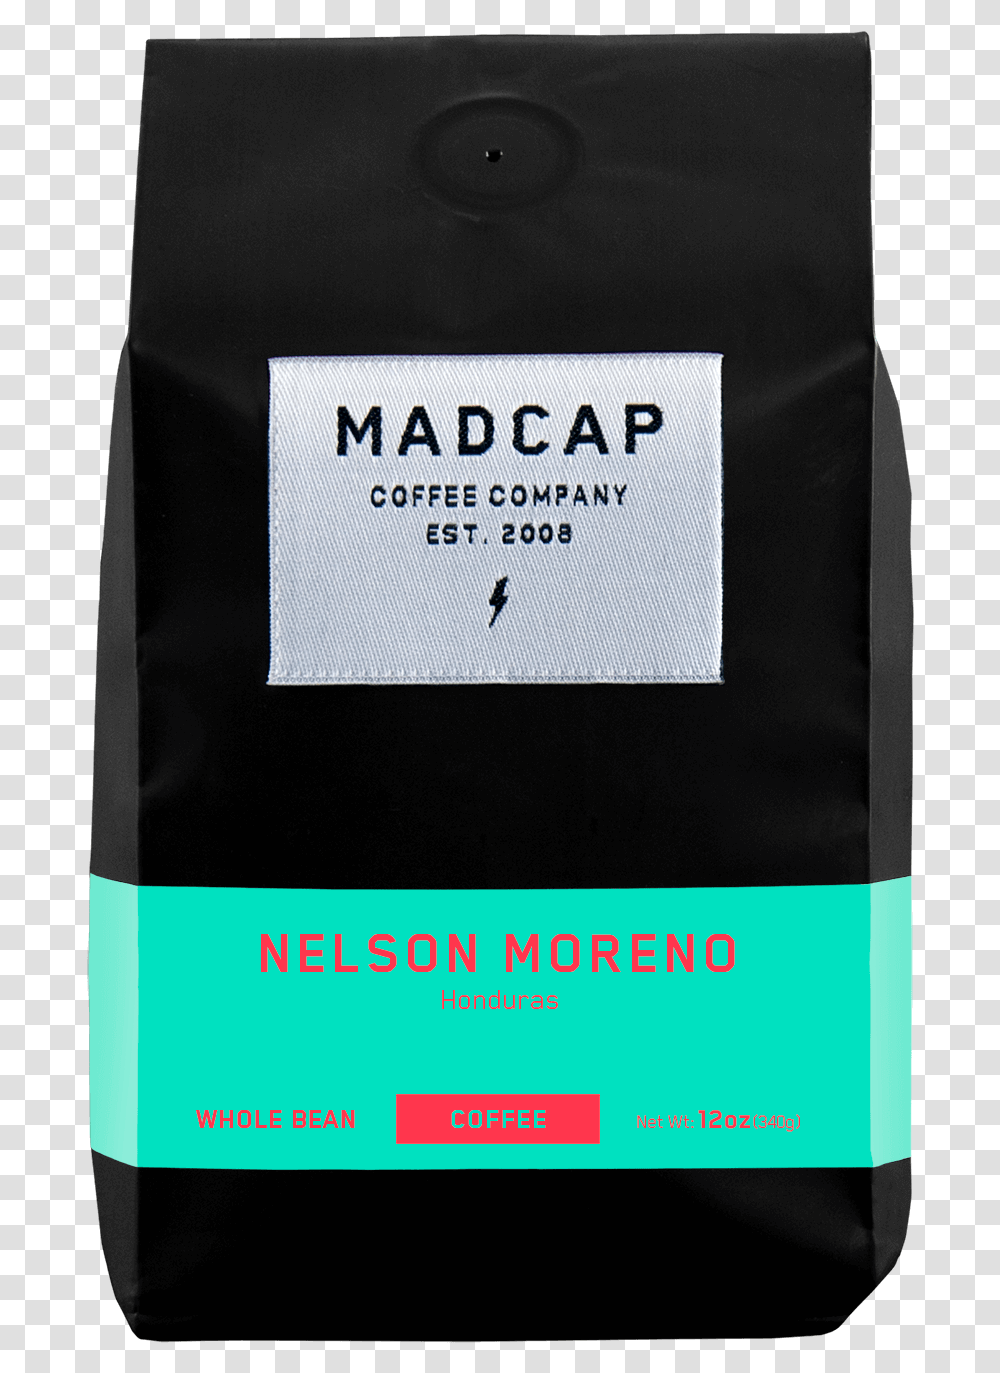 Madcap Coffee Old Packaging, Bottle, Aftershave, Cosmetics, Business Card Transparent Png